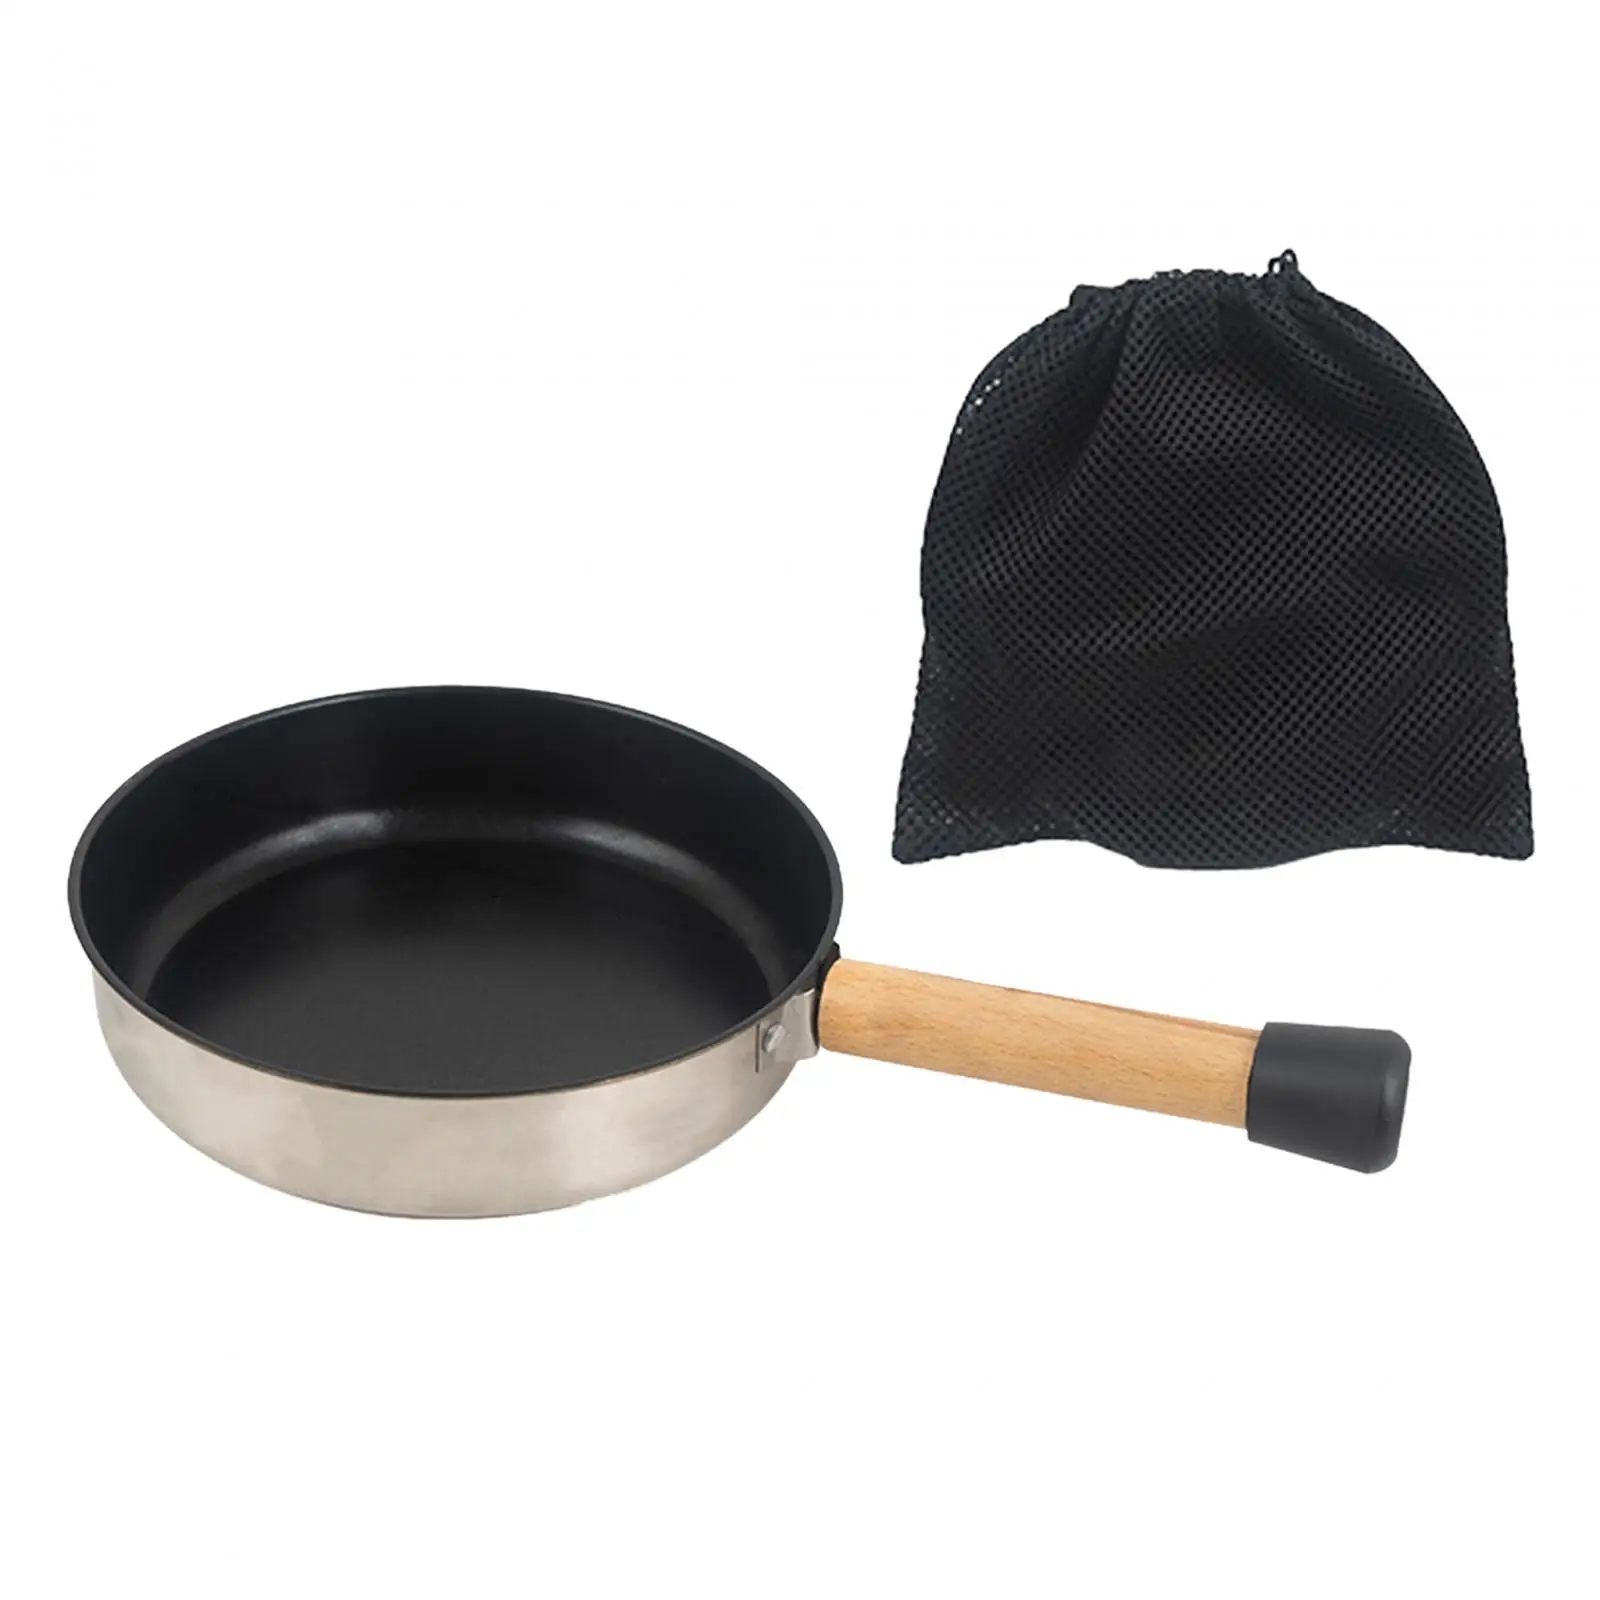 Camping Frying Pan Kitchen Cookware Nonstick Flat Griddle Pan with Wooden Handle